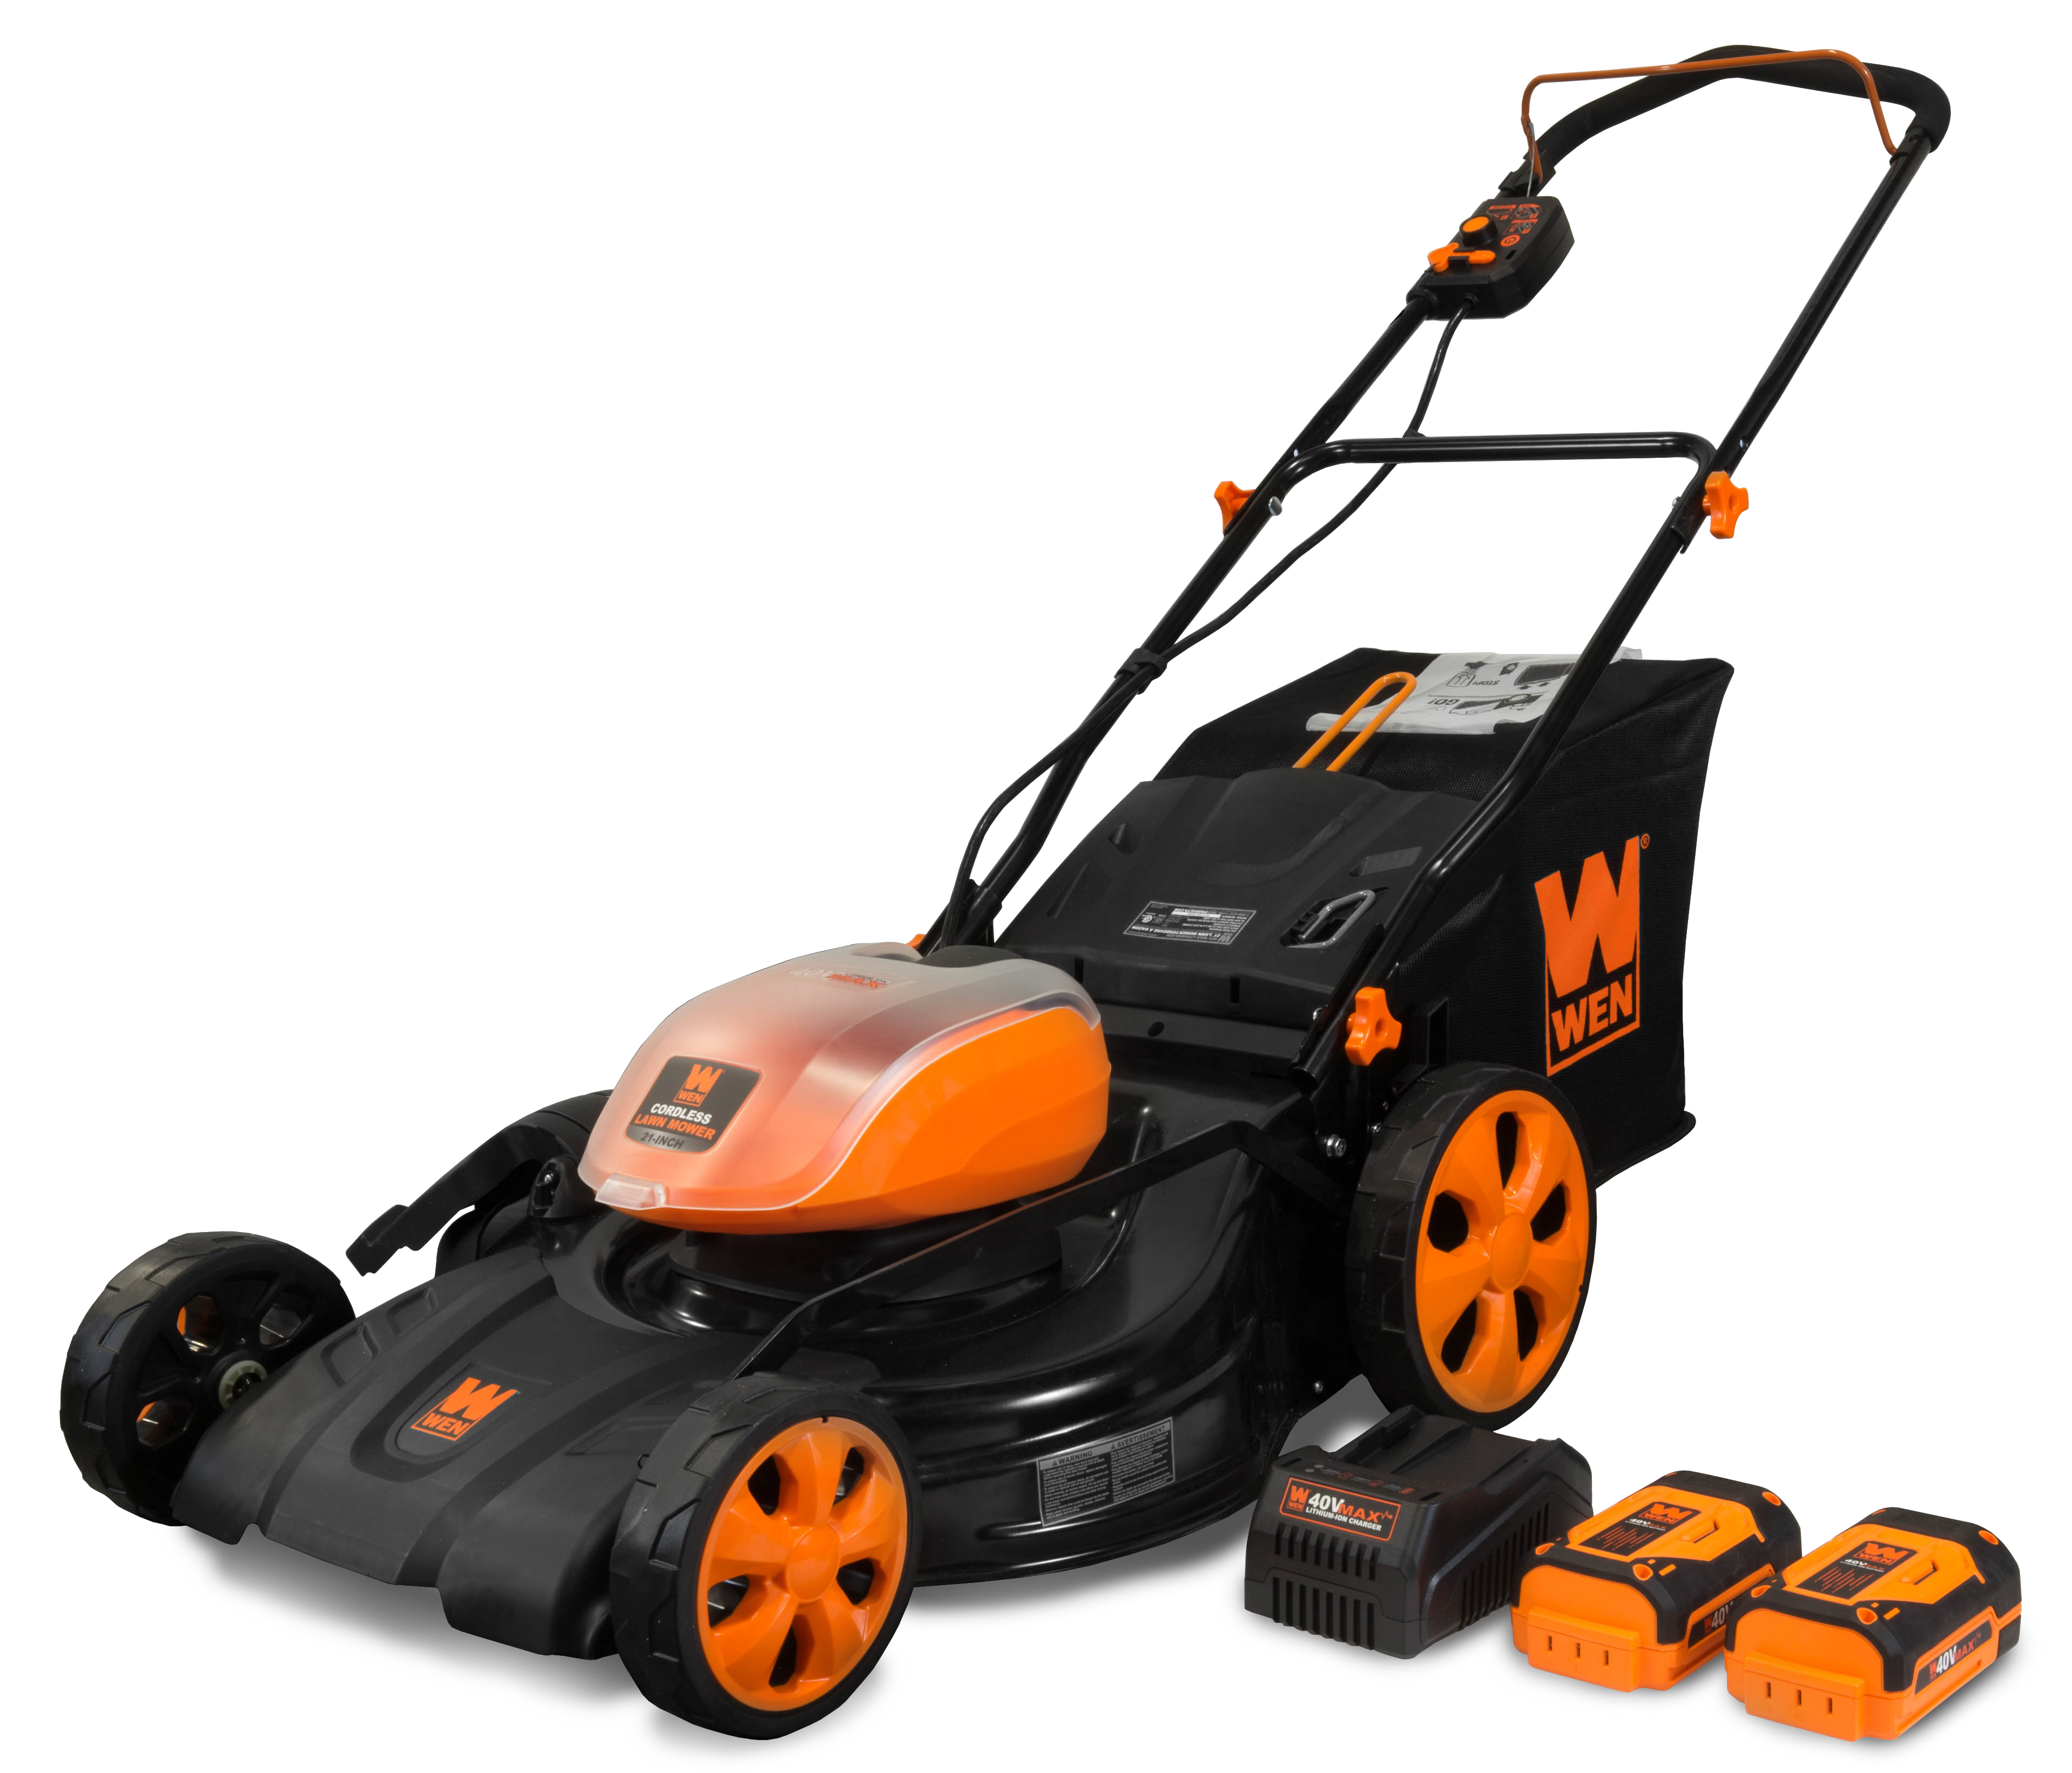 WEN 40V Max Lithium Ion 21-Inch Cordless 3-in-1 Lawn Mower with Two Batteries, 16-Gallon Bag and Charger - image 1 of 8